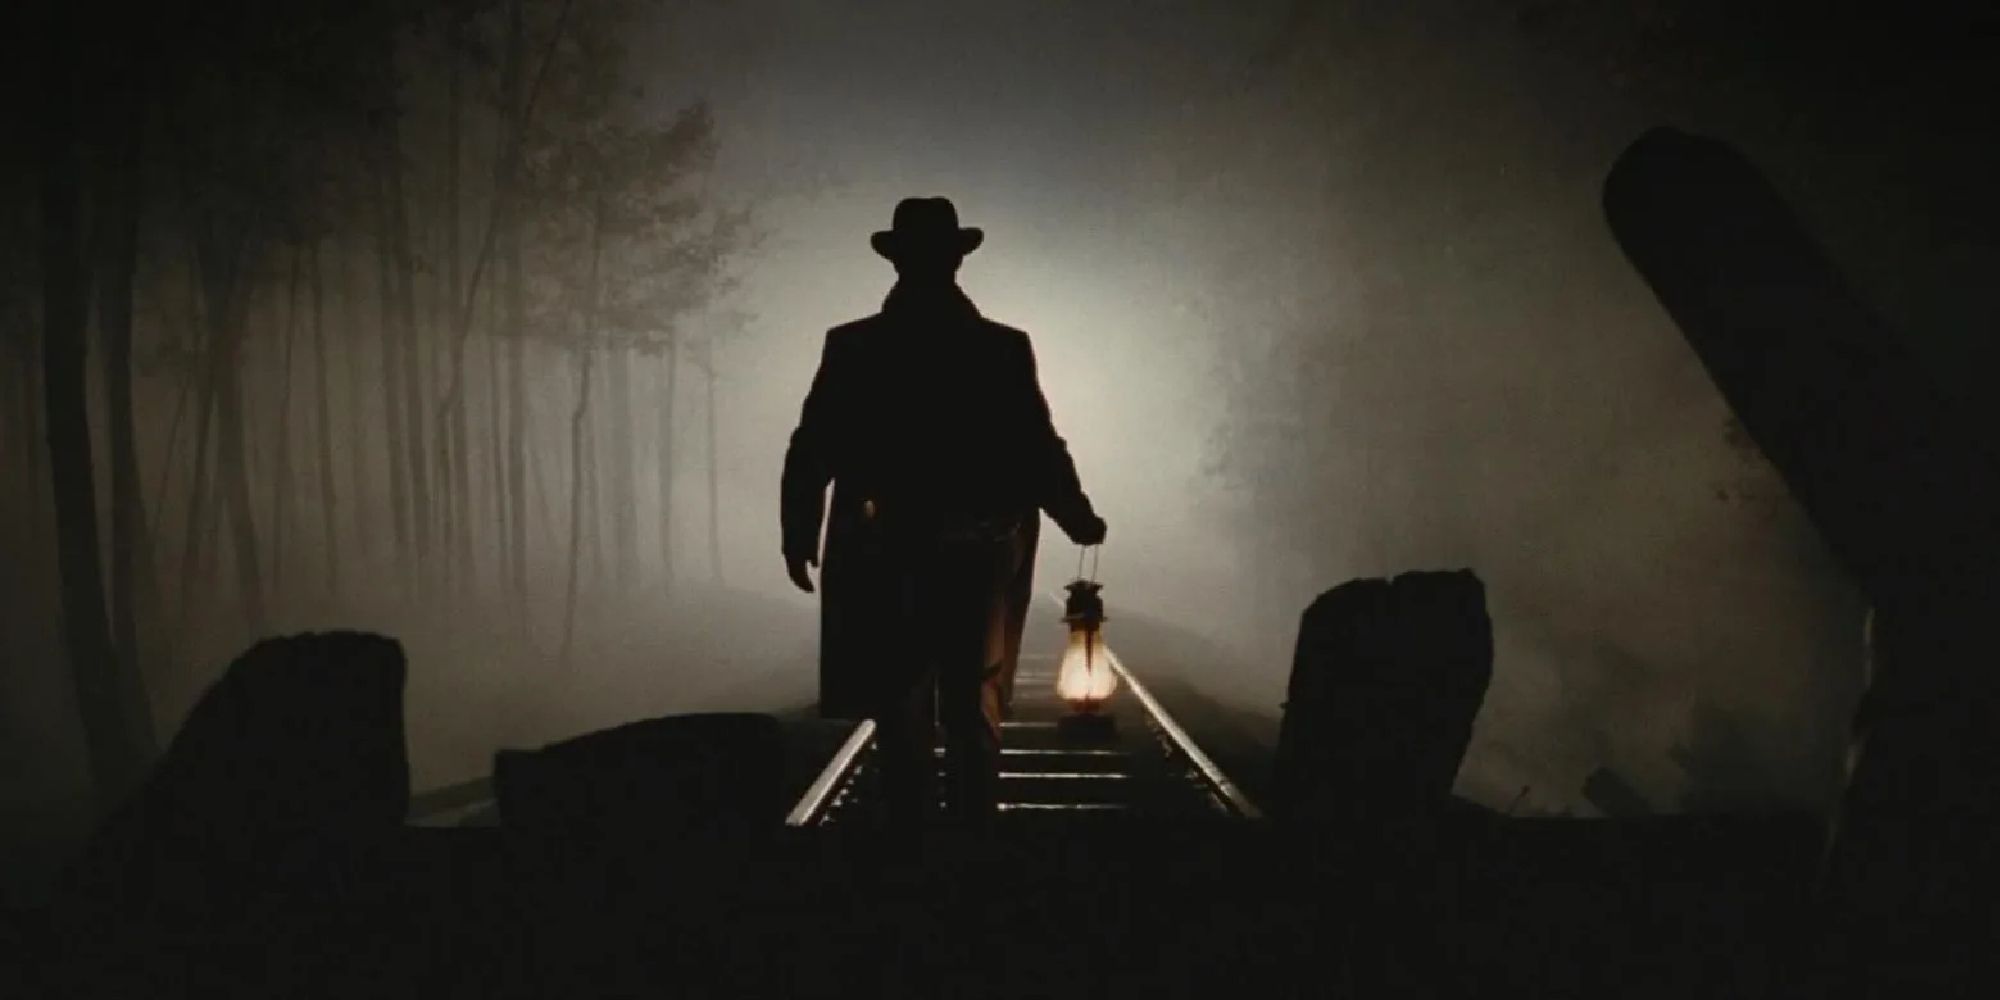 In The Assassination of Jesse James, a man walks in the middle of the railroad tracks with a lamp